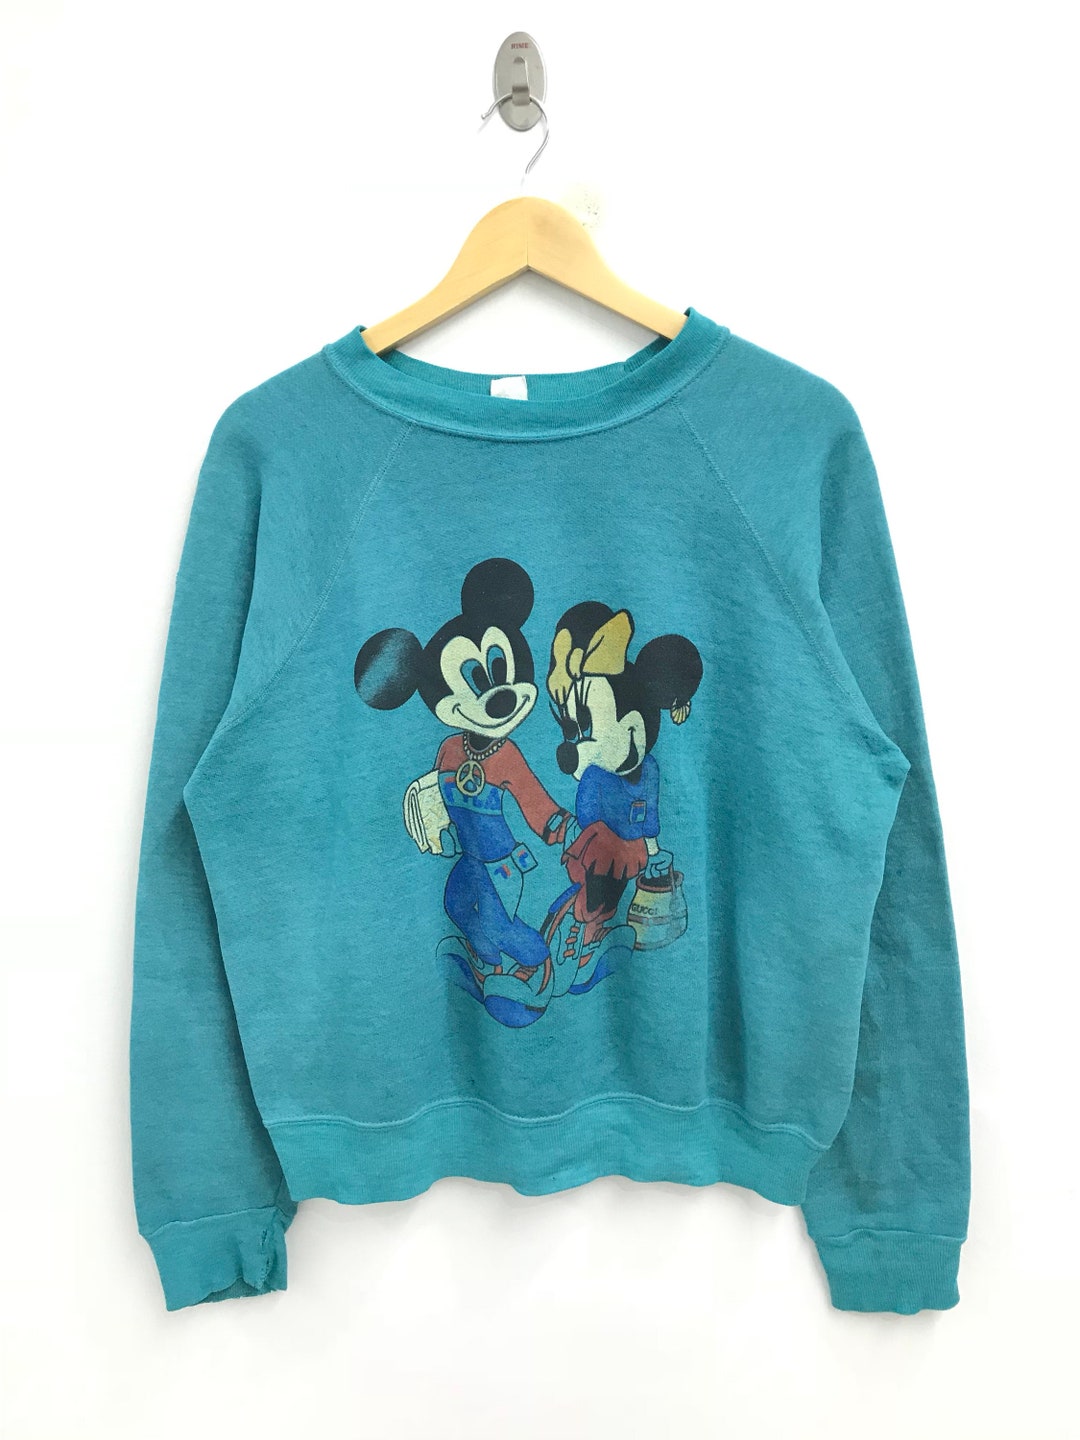 Mickey Mouse wear Louis Vuitton shirt, hoodie, sweater and long sleeve